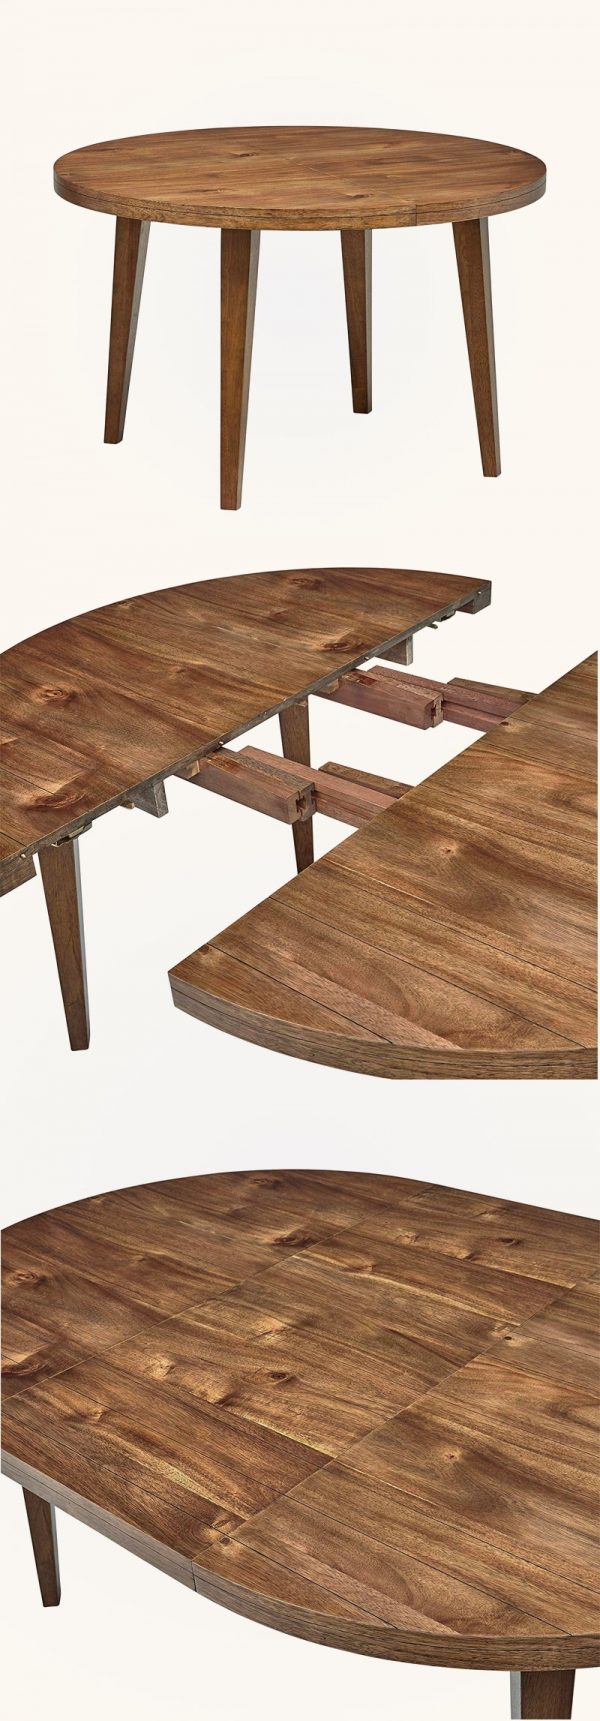 41 Extendable Dining Tables To Maximize, Round Dining Table That Gets Bigger